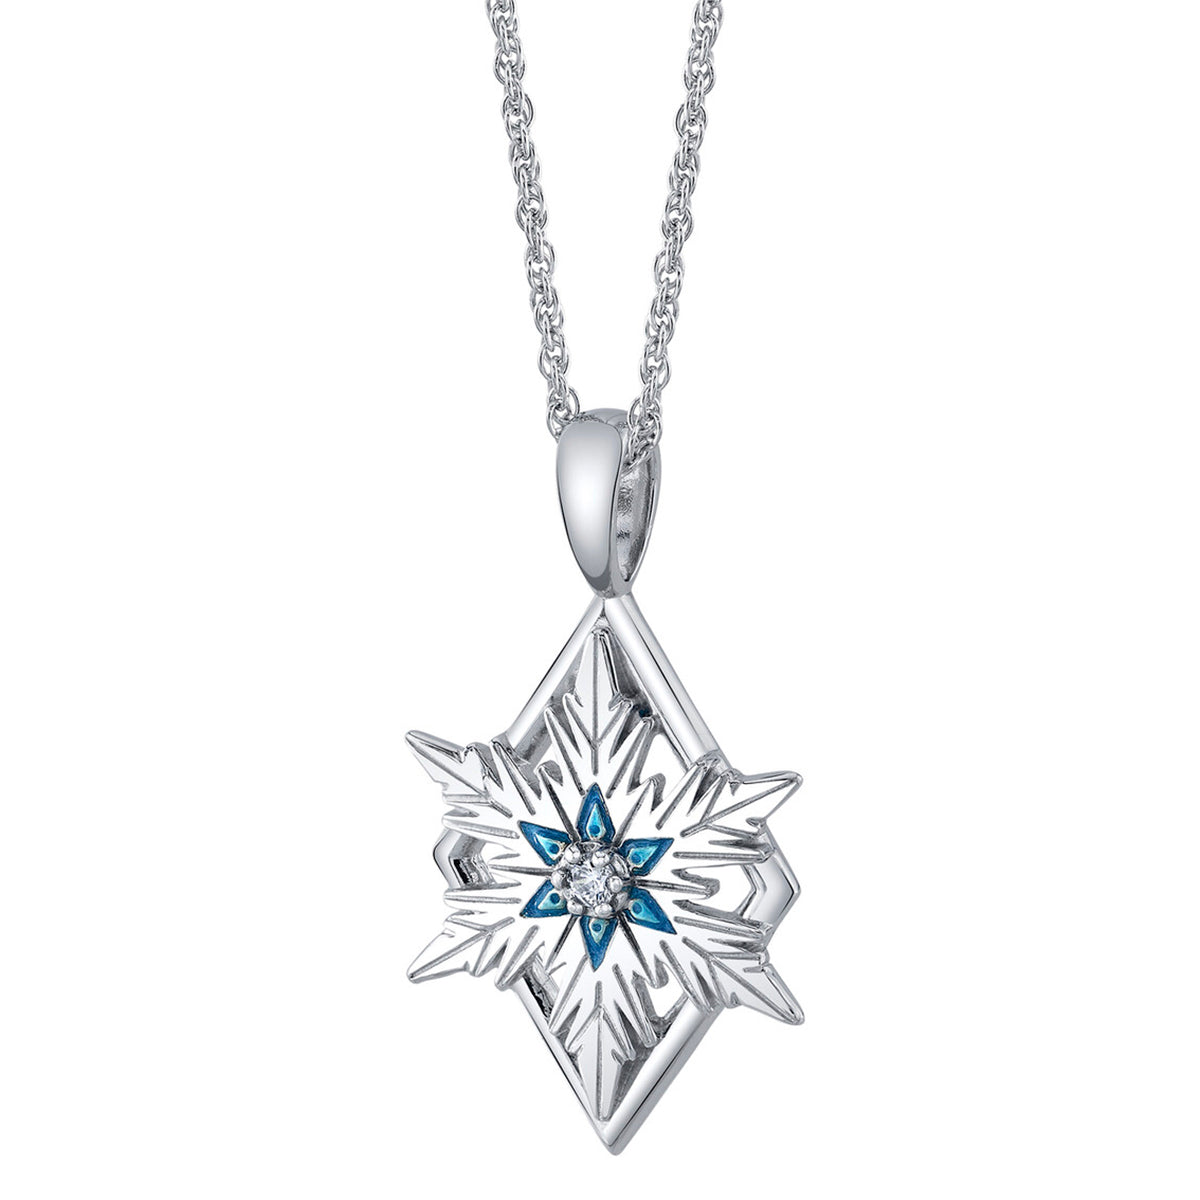 Buy Elsa Anna Frozen Snowflake Necklace Cosplay Costume Disneybound Musical  Jewel Anna Queen Princess Snow Sparkle Once Upon A Time Online in India -  Etsy